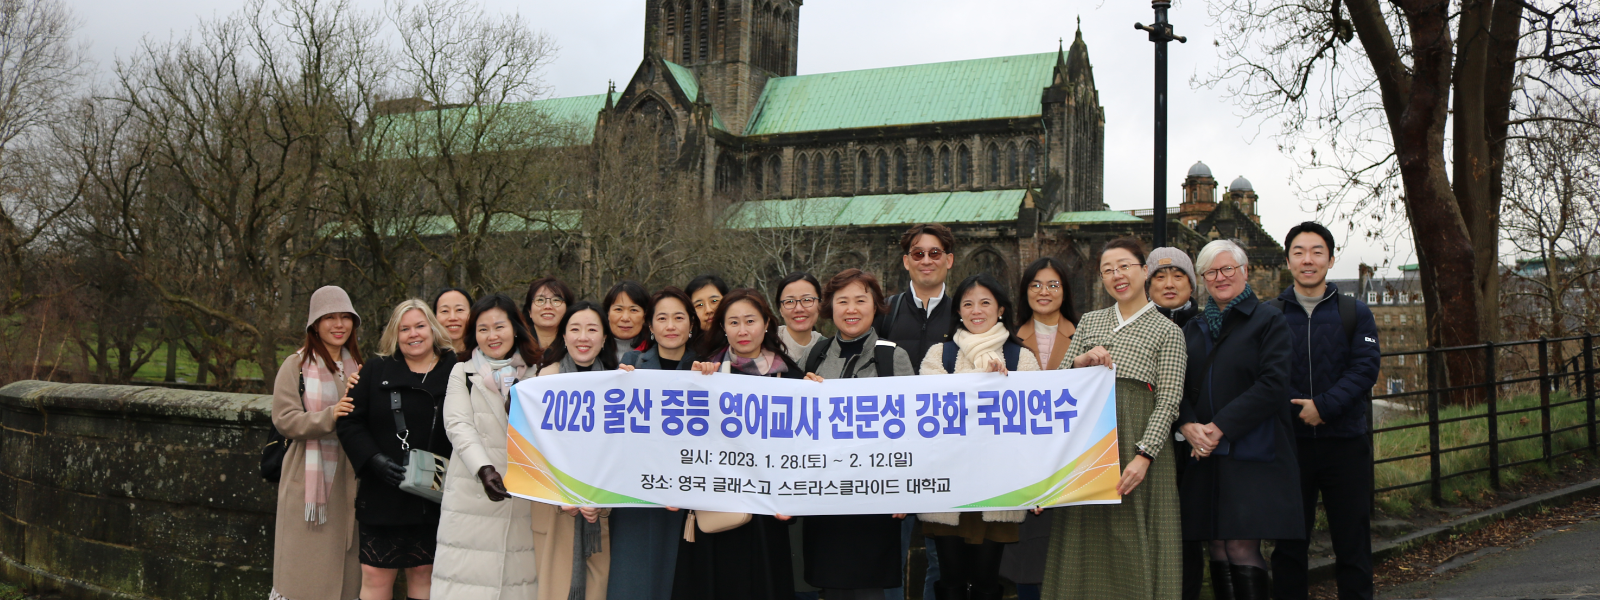 A group of people stand in front of Glasgow Cathedral holding a banner with Korean writing